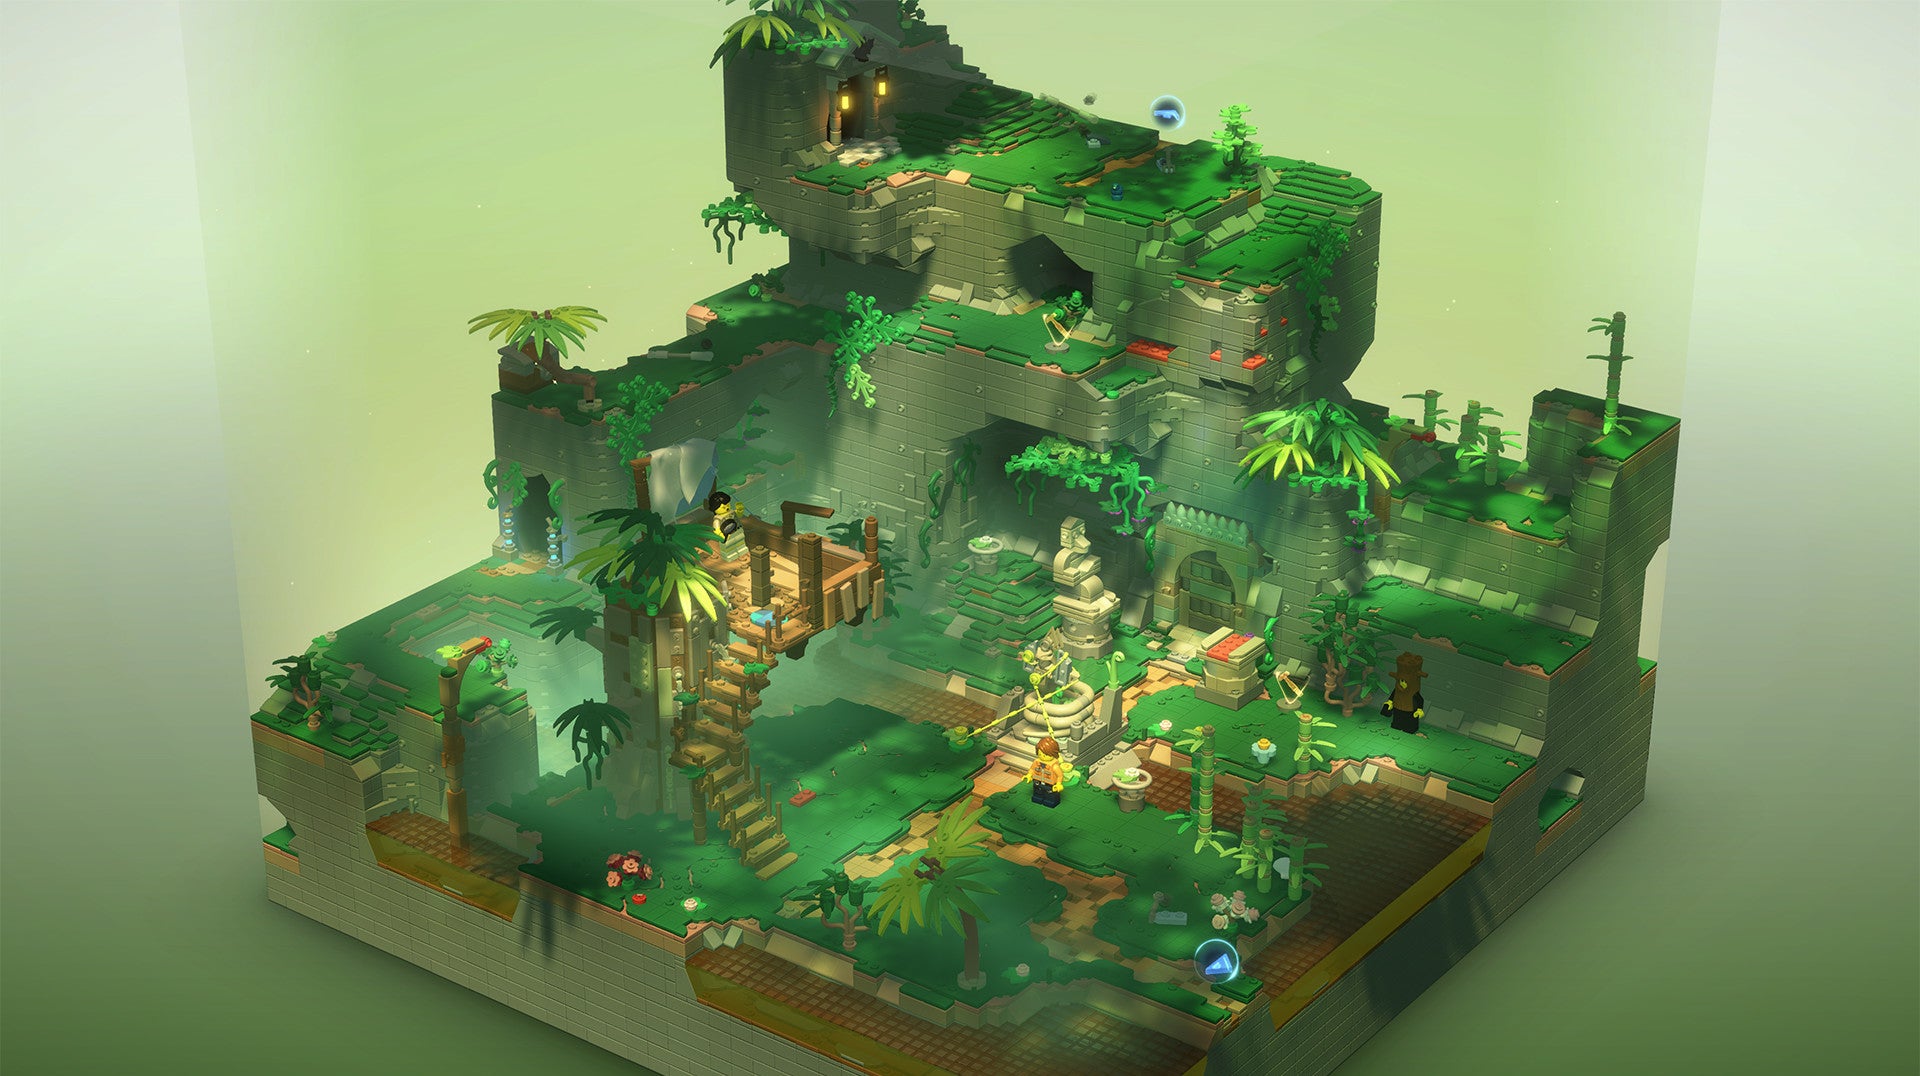 Image for Lego Bricktales is a new diorama-based puzzler from the Bridge Constructor team